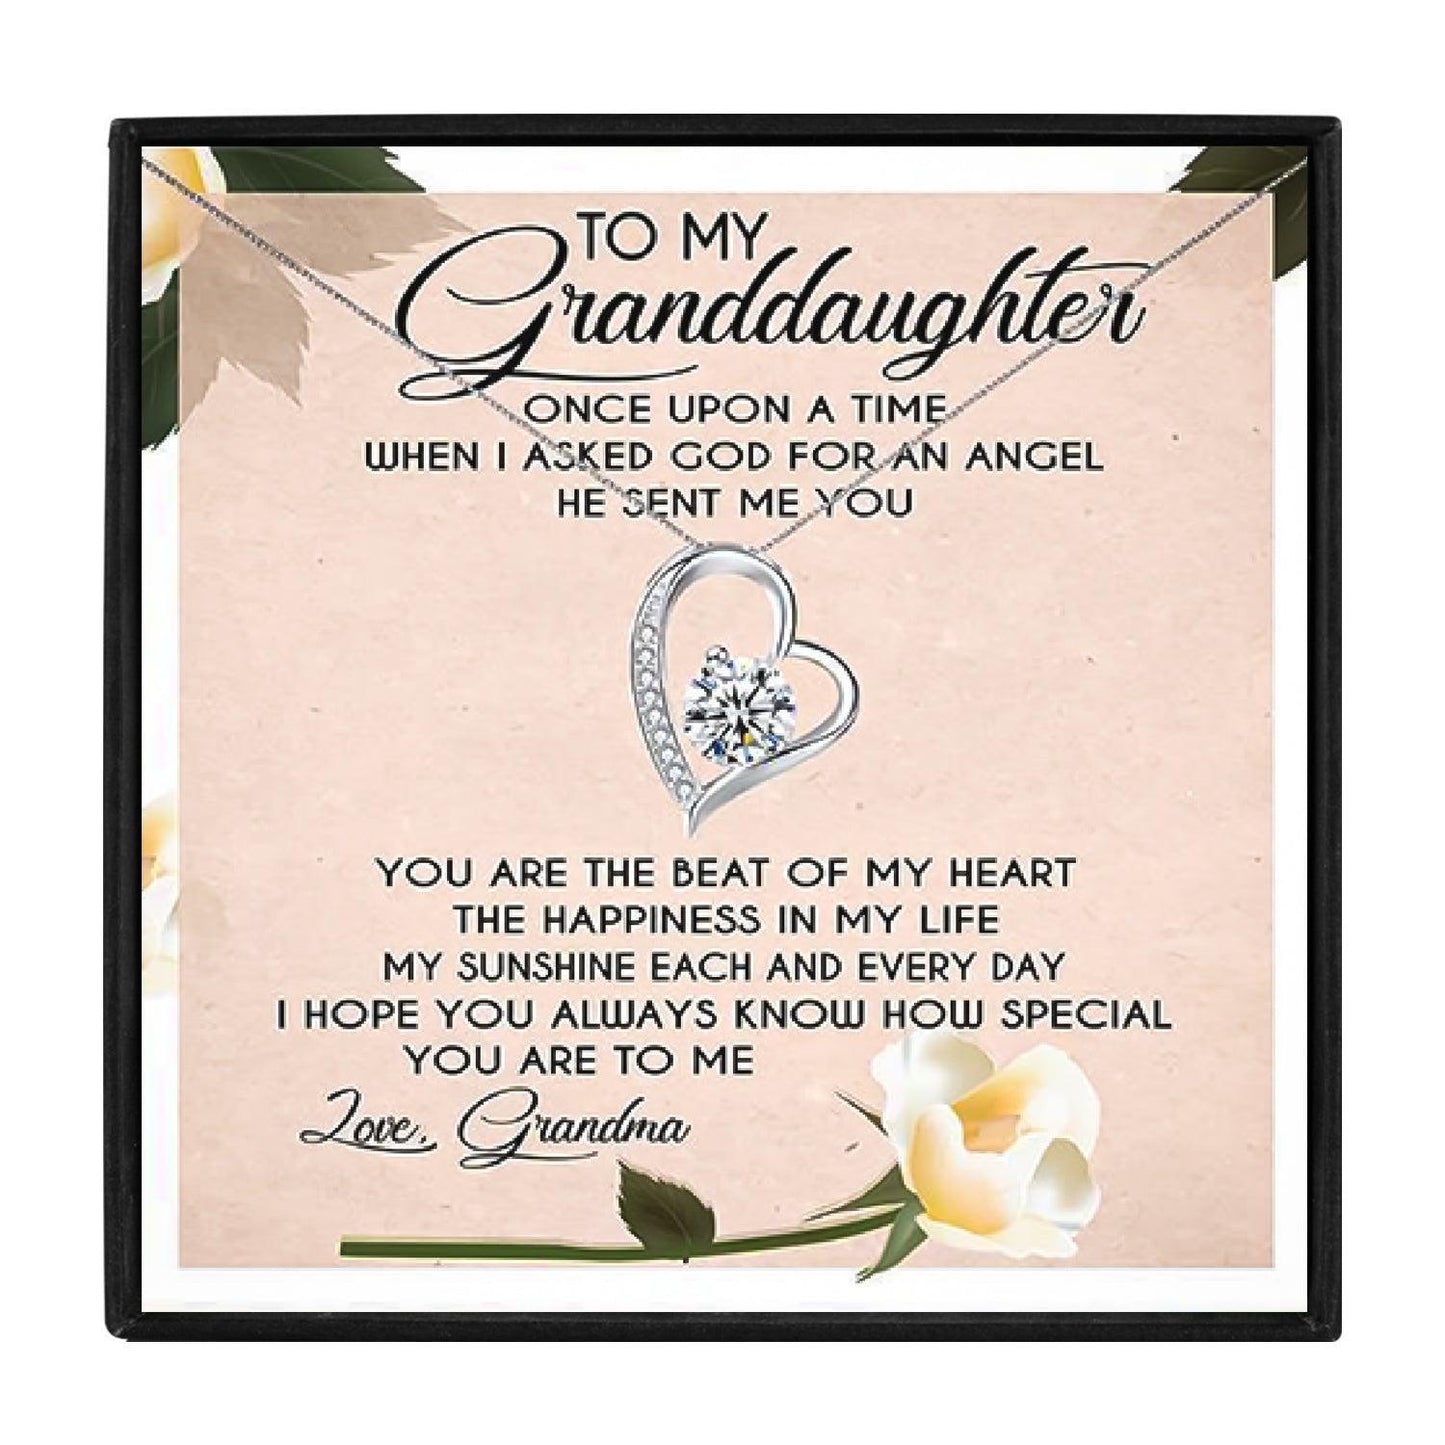 To My Granddaughter Necklace From Grandma in 2023 | To My Granddaughter Necklace From Grandma - undefined | Granddaughter, Hollow Heart Pendant Necklace, necklace, To My Granddaughter, To My Granddaughter Hollow Heart Pendant Necklace 002 | From Hunny Life | hunnylife.com